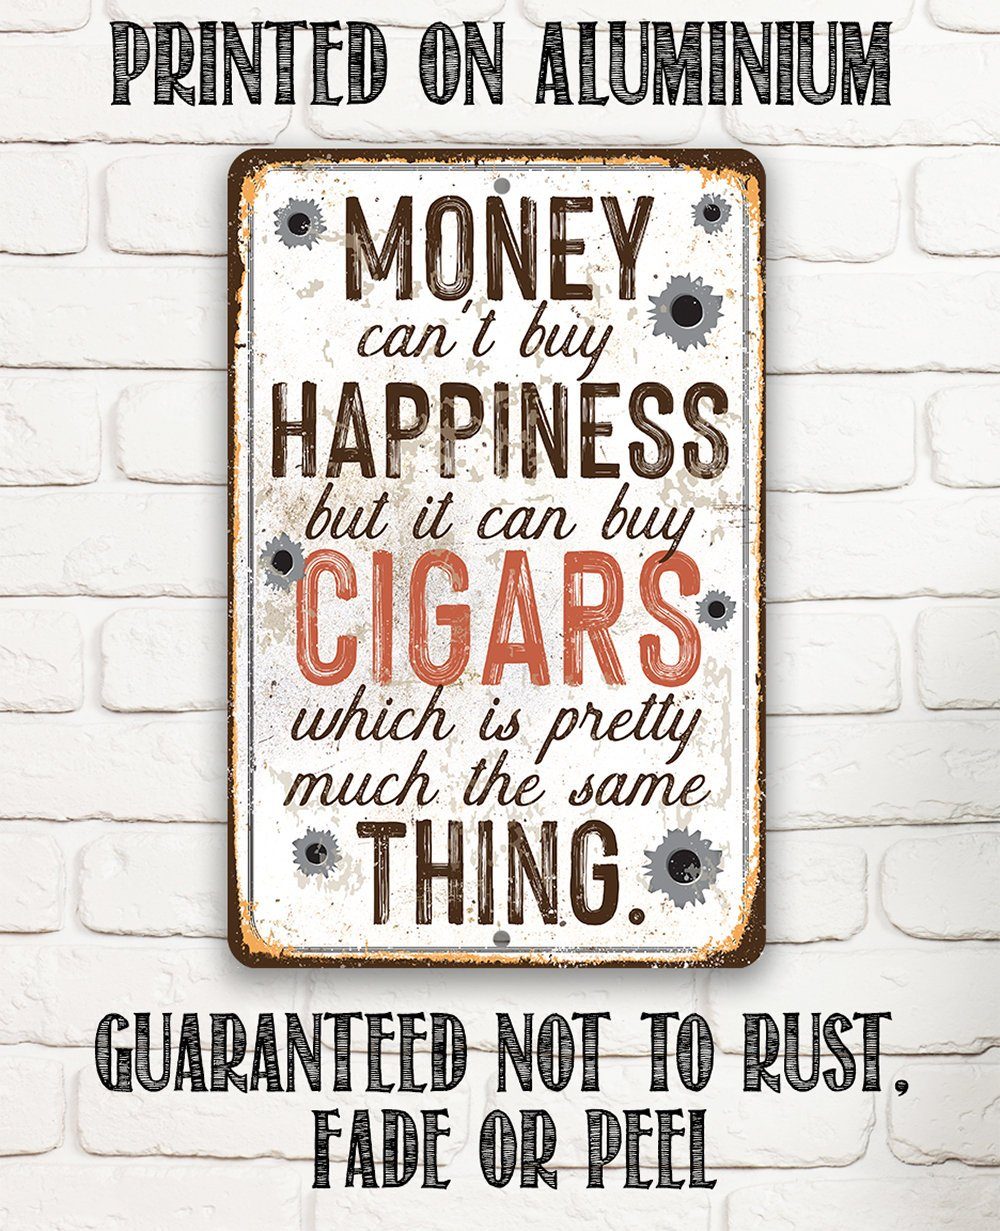 Money Can Buy Cigars - Metal Sign | Lone Star Art.